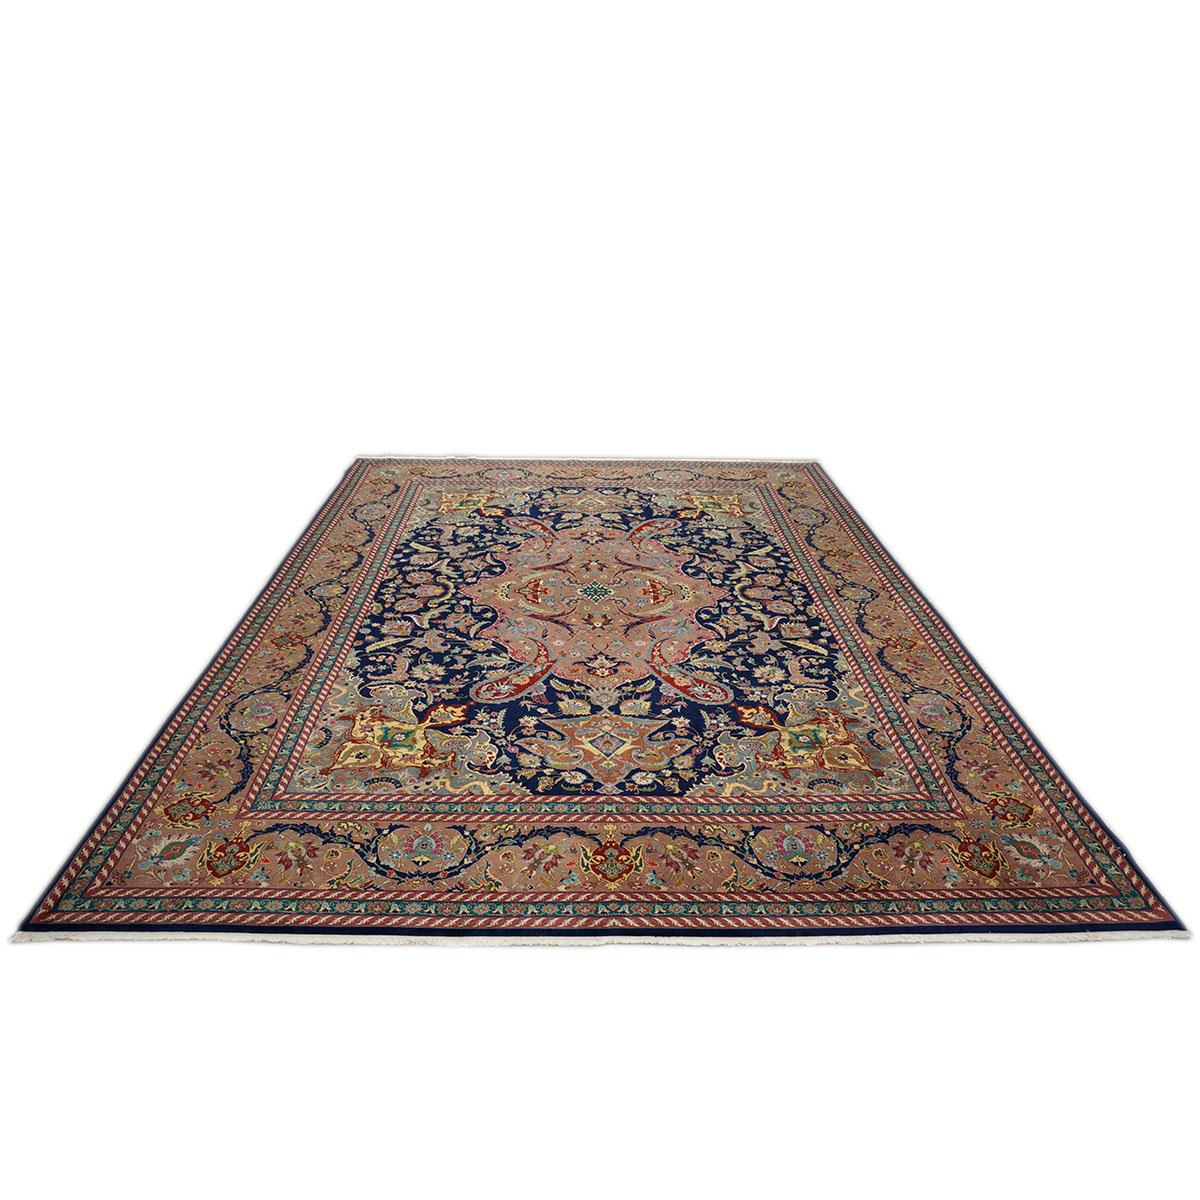 20th century Persian Tabriz navy blue & dust rose wool room-sized rug 10 x 13. It is in pristine condition with no apparent repairs or wear. The colors are rich and vibrant it is a very elegant and timeless carpet. This piece was woven sometime in